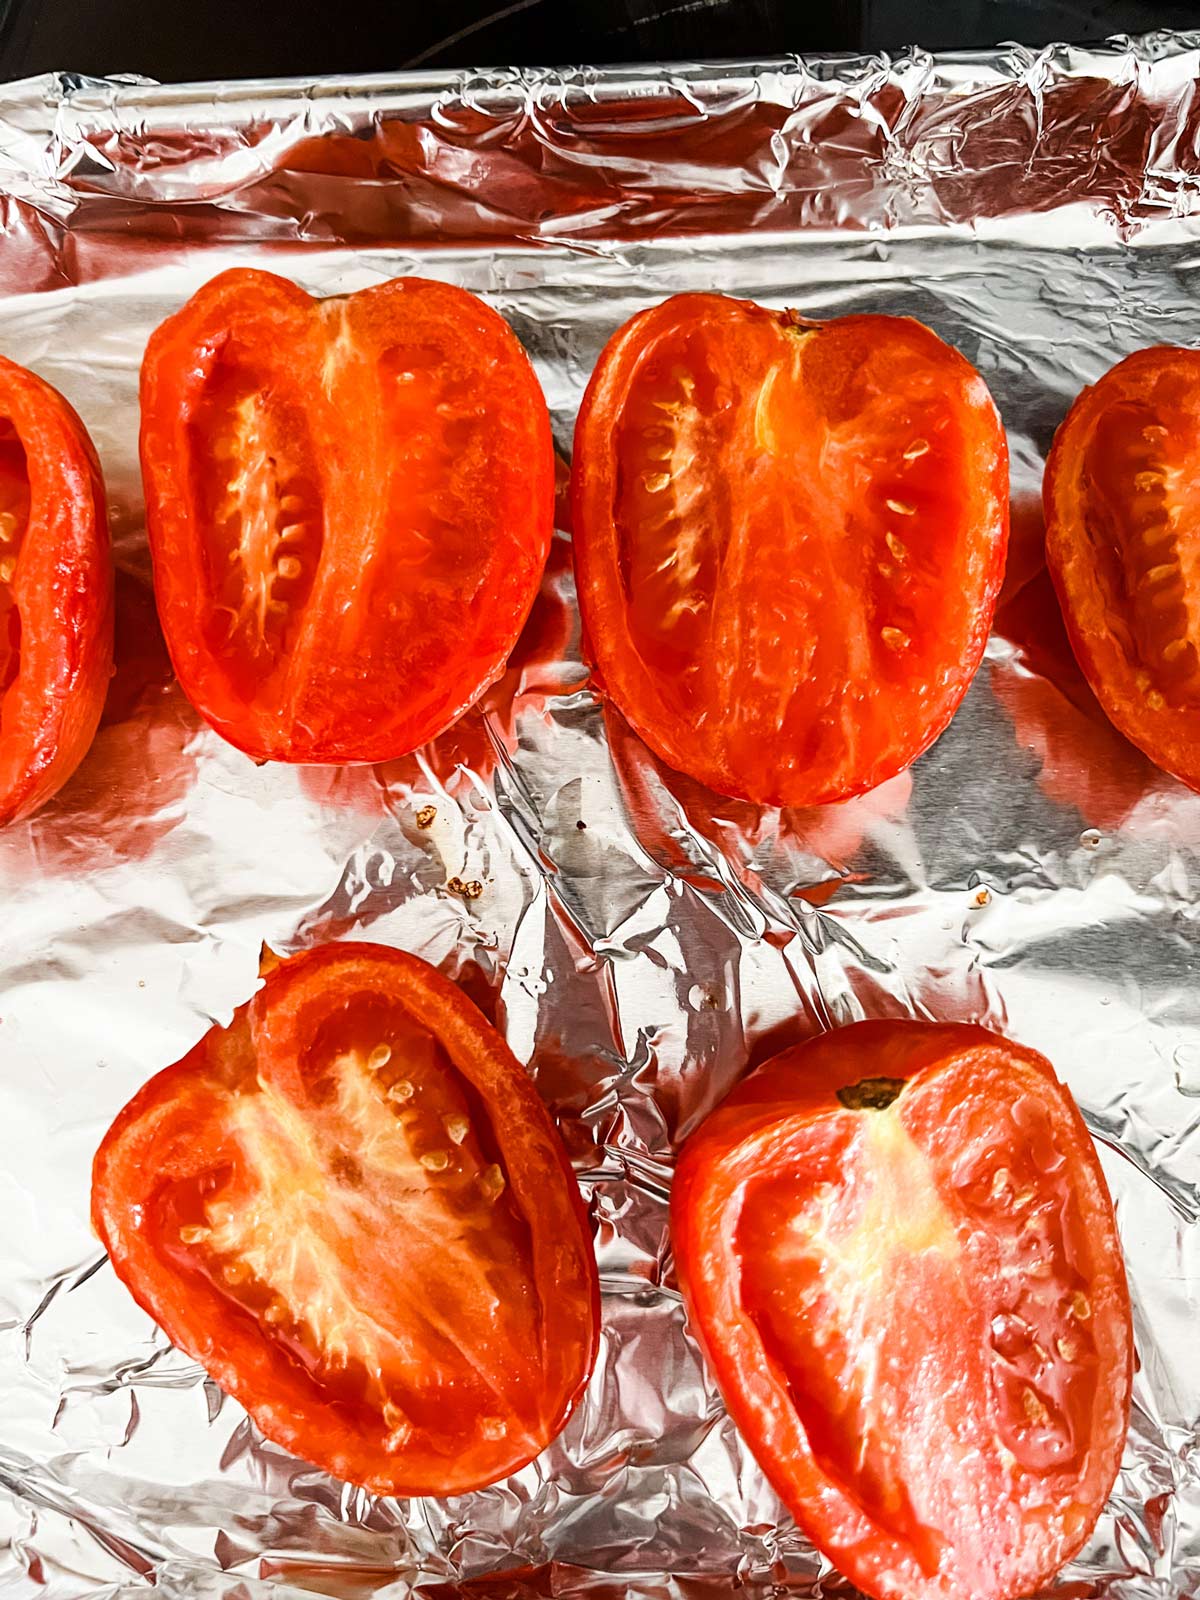 Boiled tomatoes on a foil lined sheet pan.